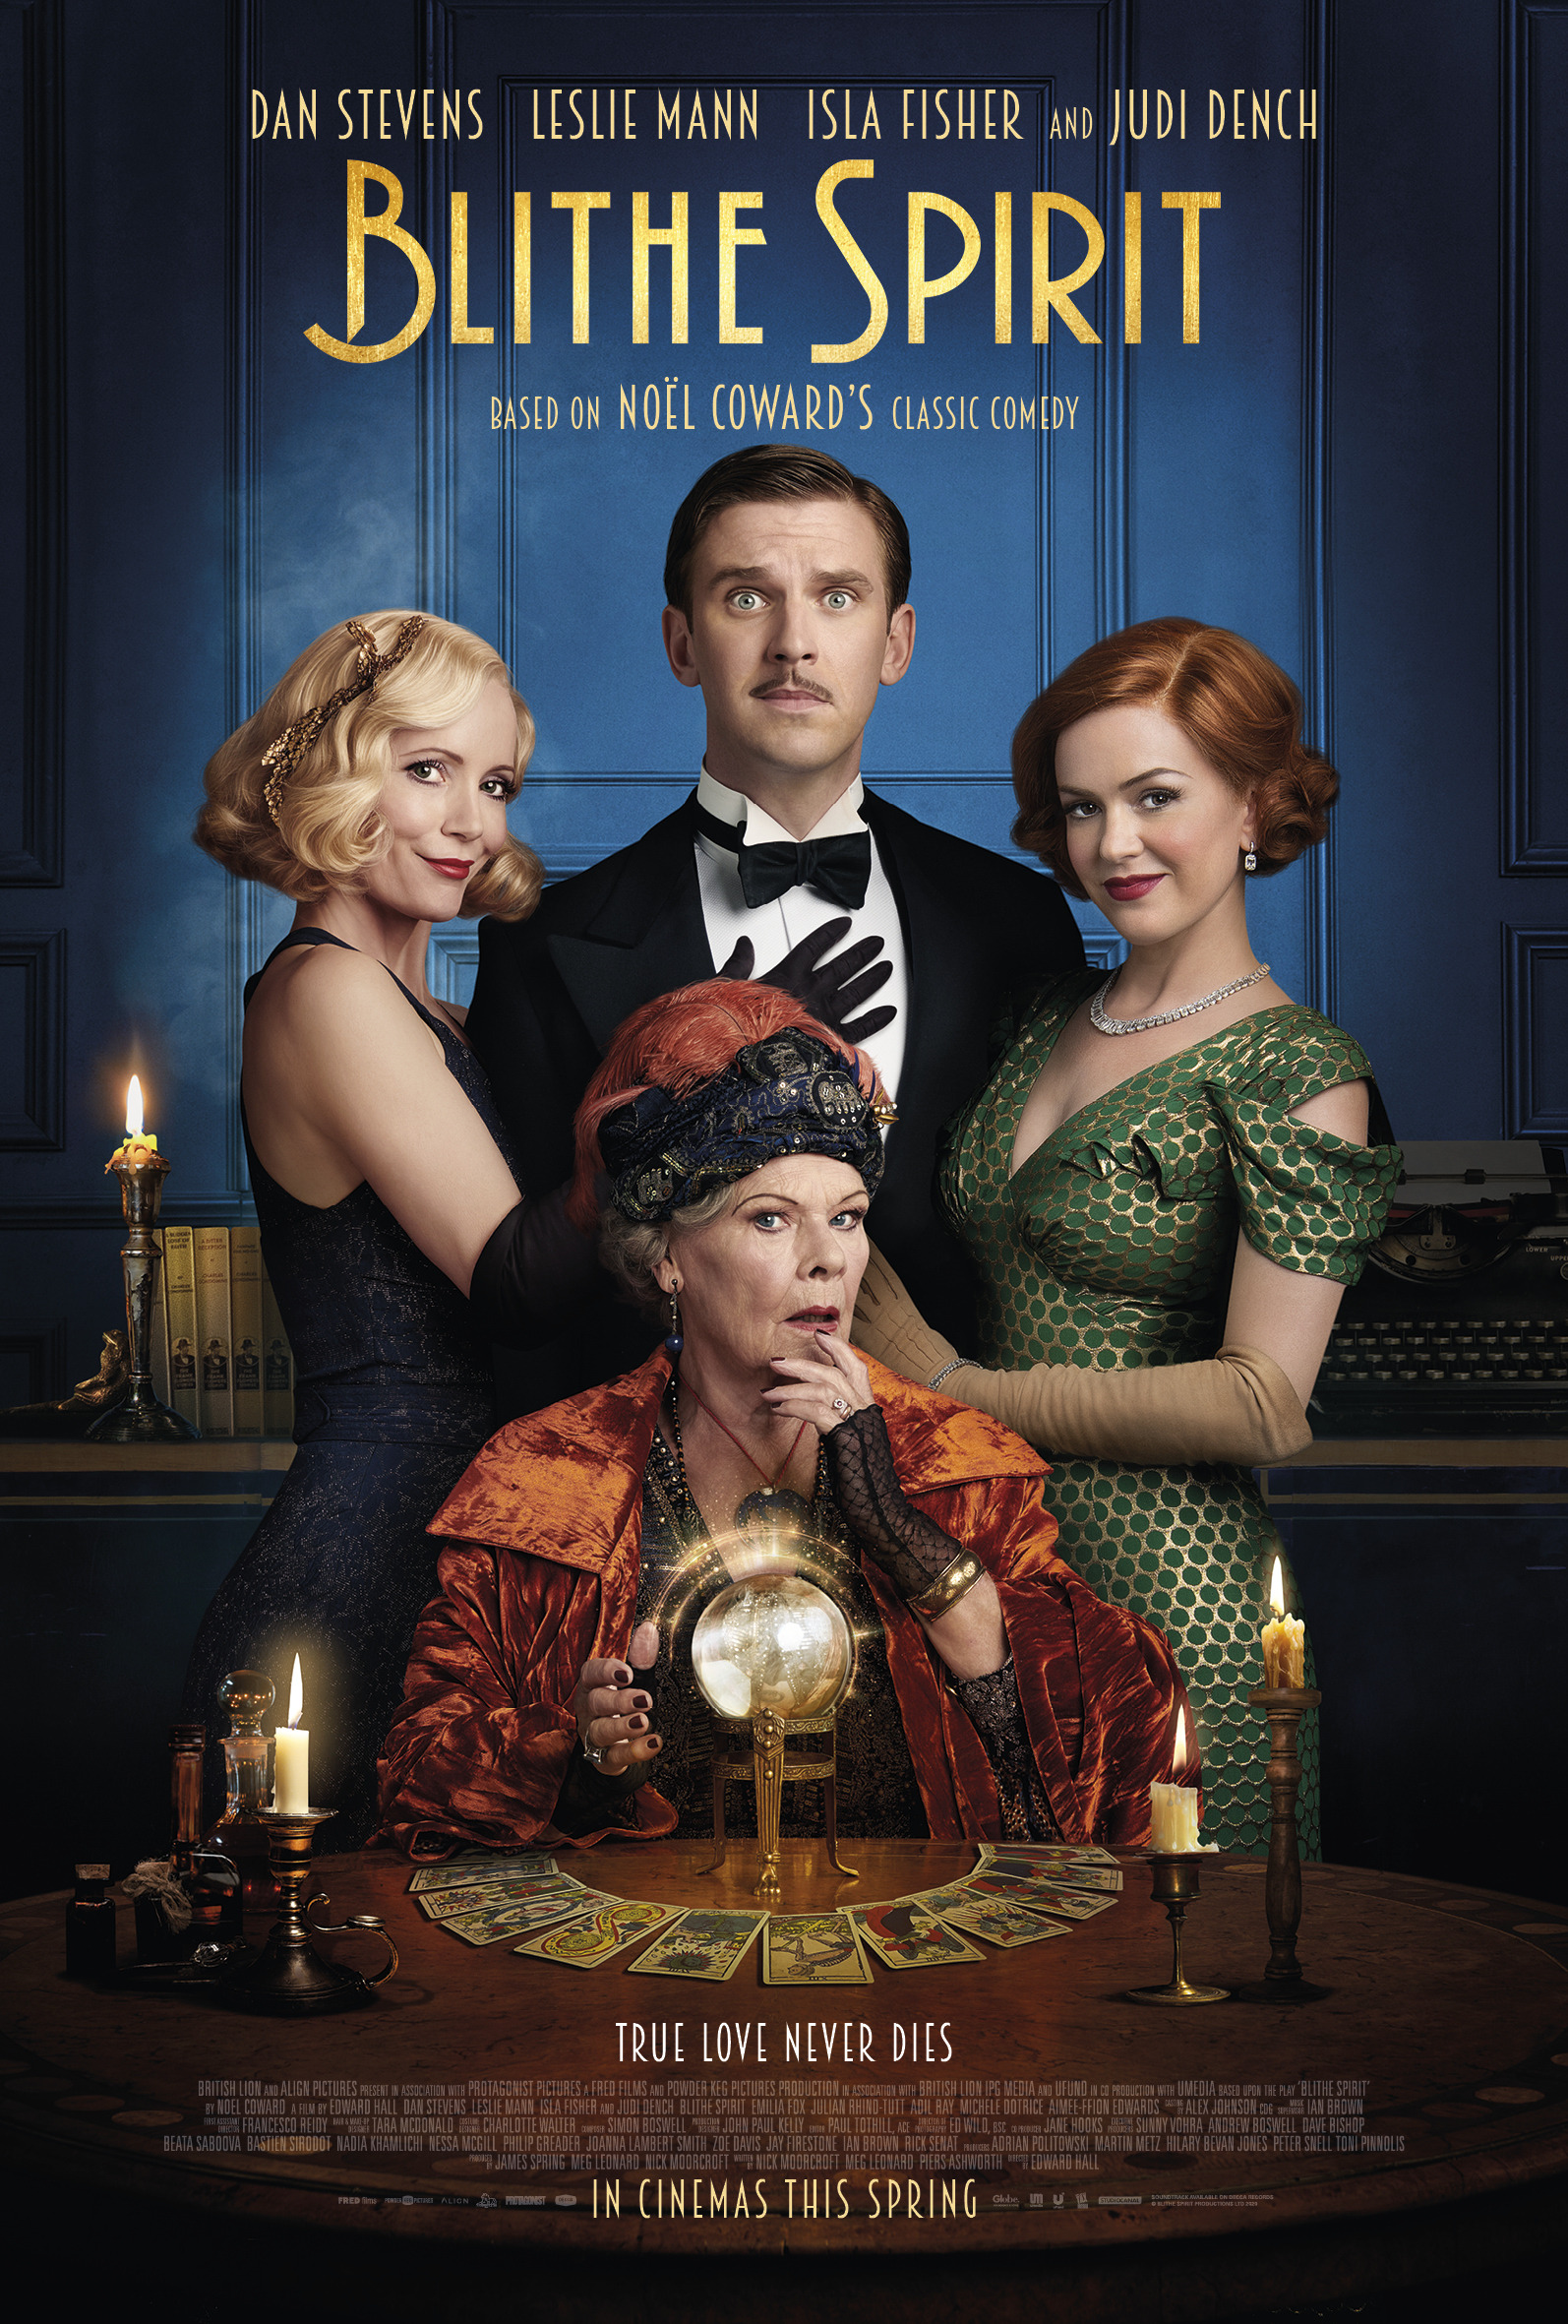 Blithe Spirit Movie Poster: Three people standing around a woman seated at a table with a crystal ball in front of her.